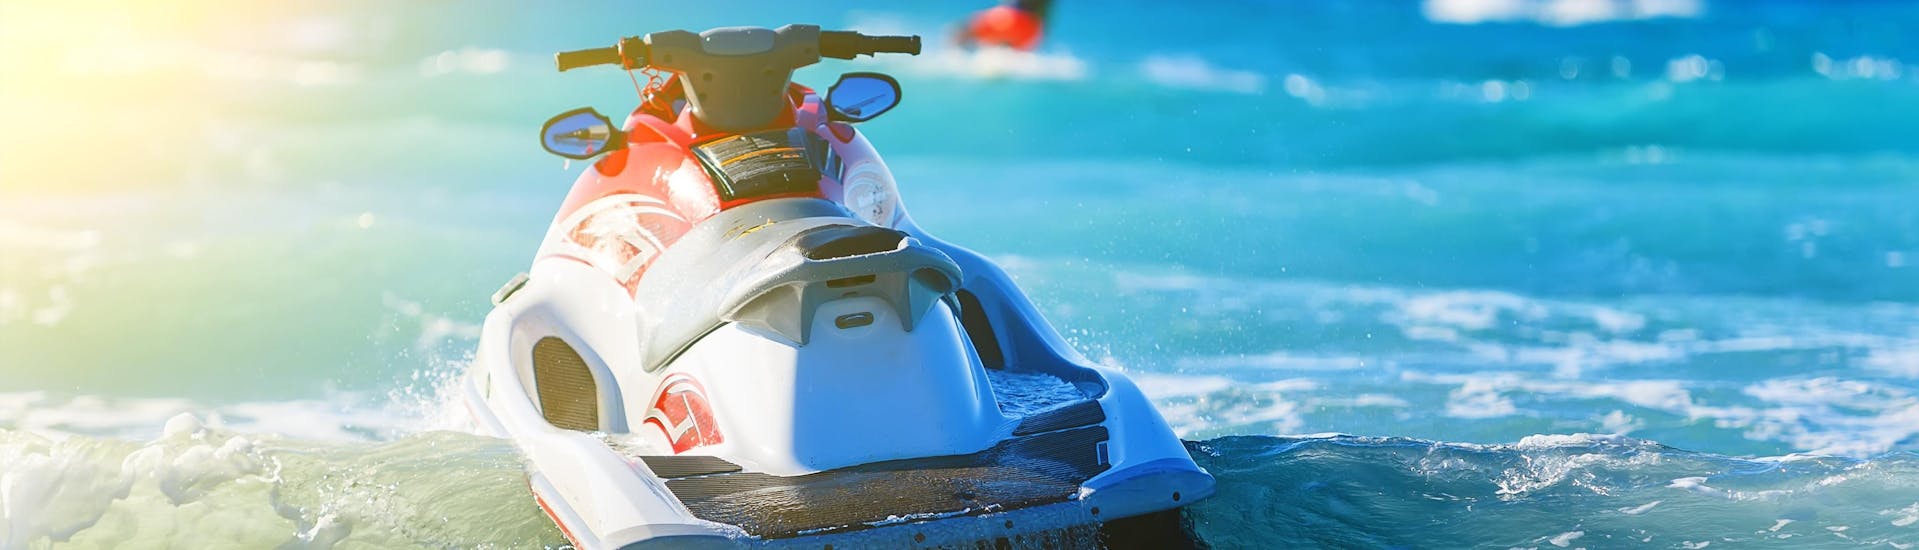 An image of a jet ski floating in the sea, a popular water craft amongst those who enjoy water sports in Ibiza.